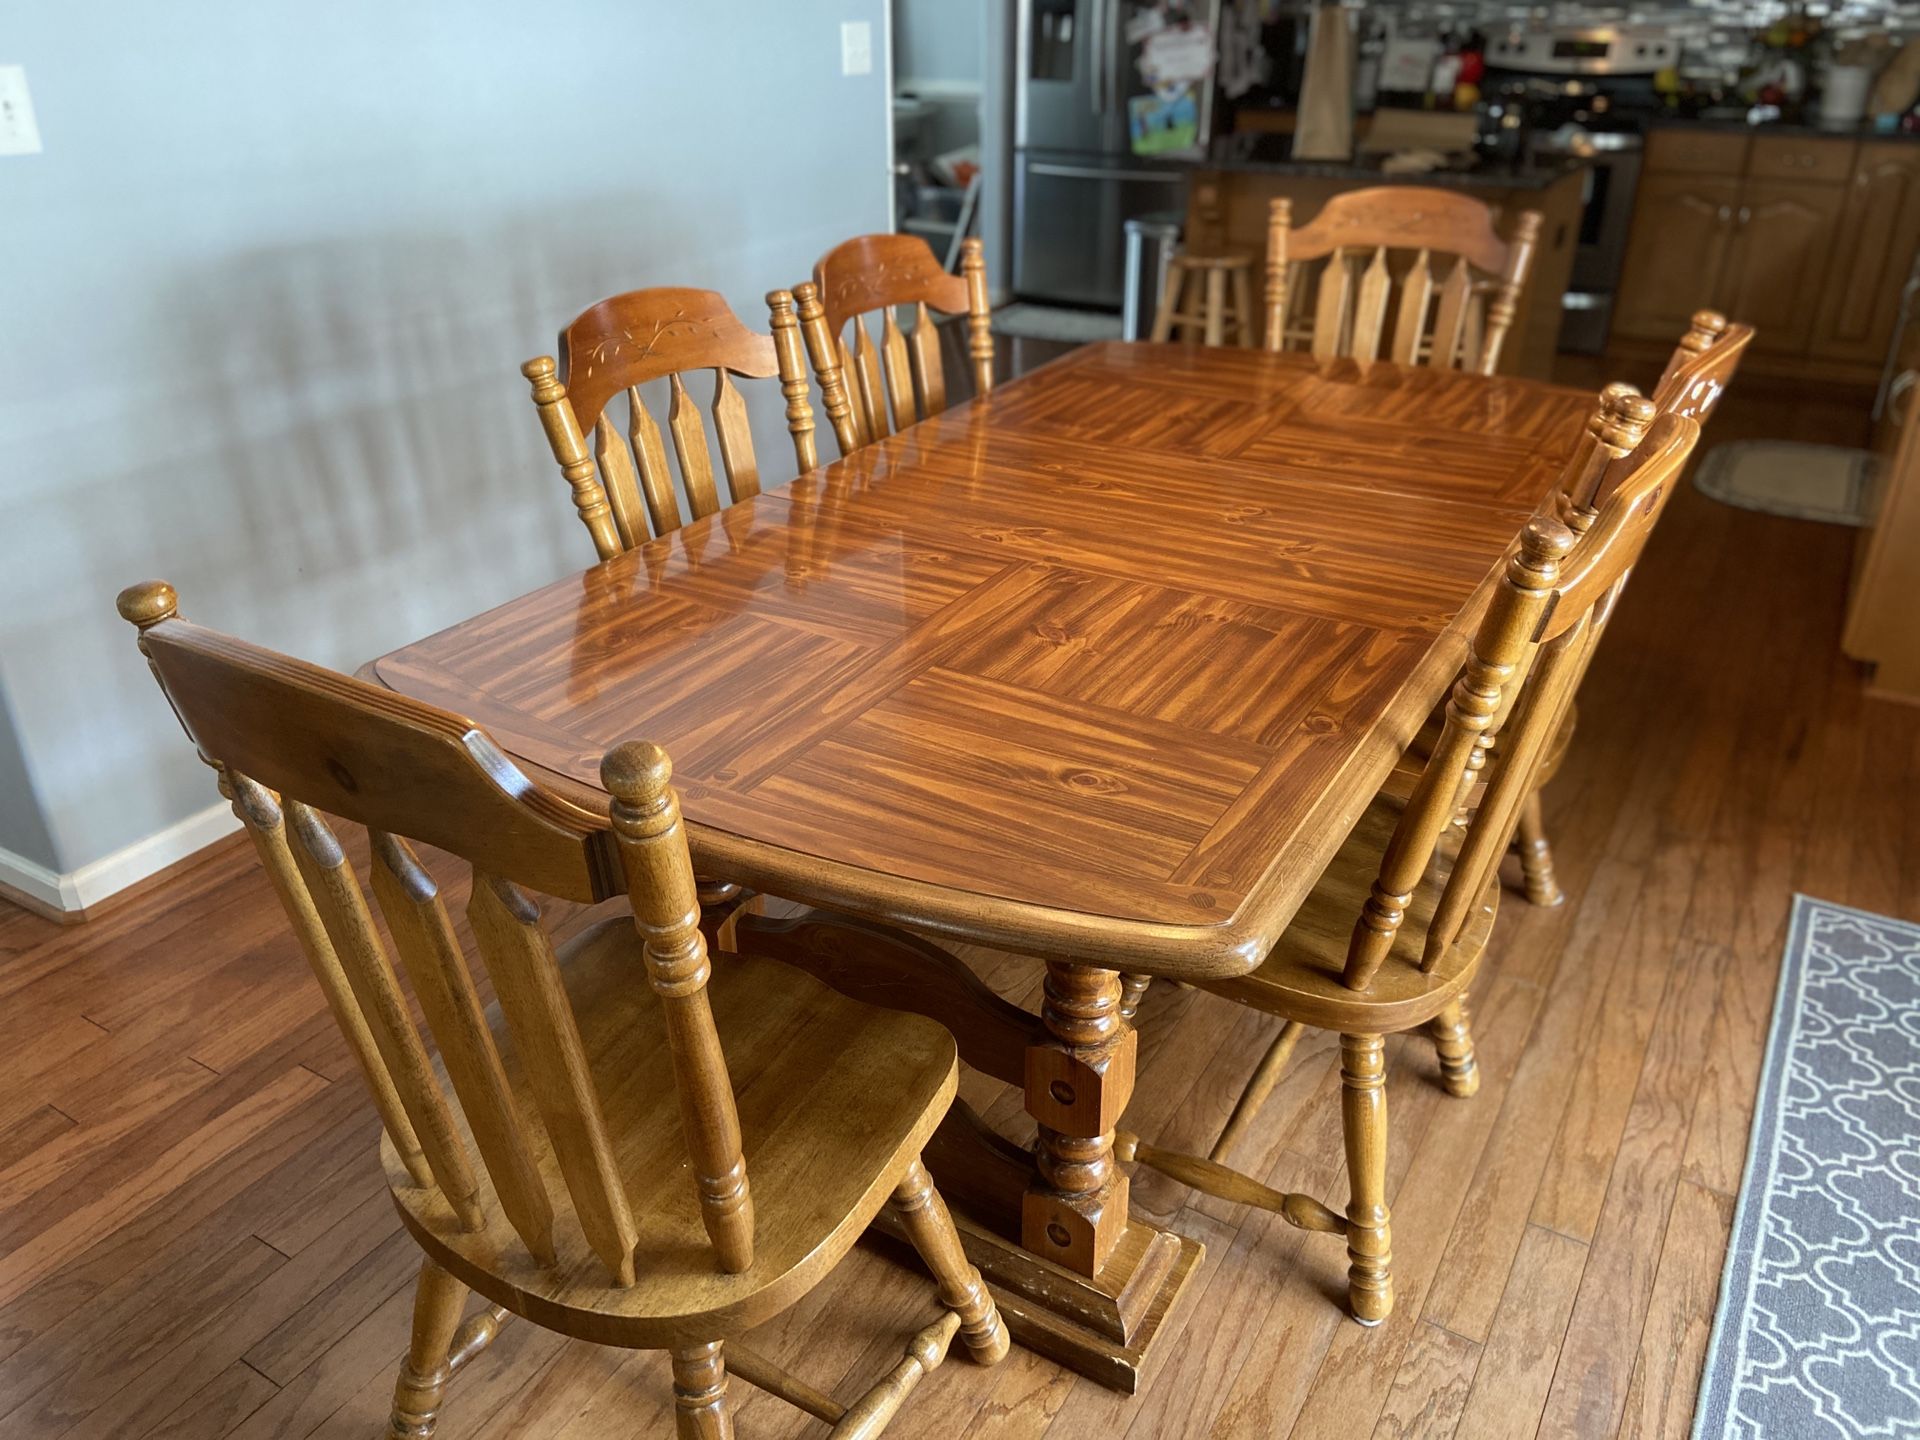 Solid Wood Kitchen Table (6 chairs)